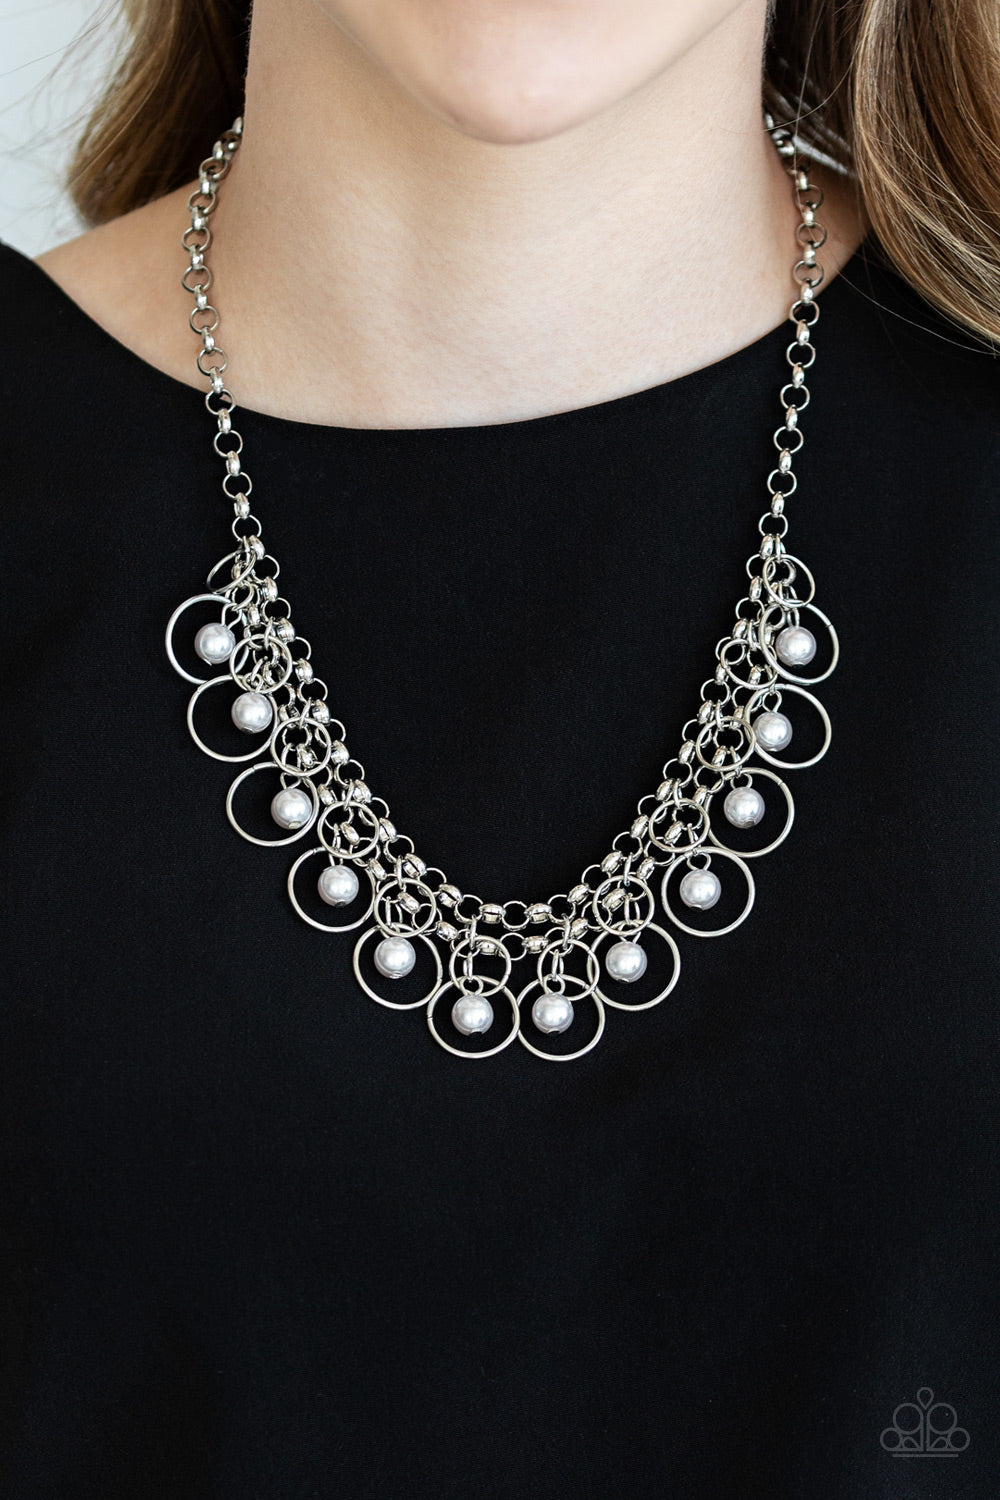 Paparazzi Party Time - Silver Pearls - Necklace & Earrings - $5 Jewelry With Ashley Swint